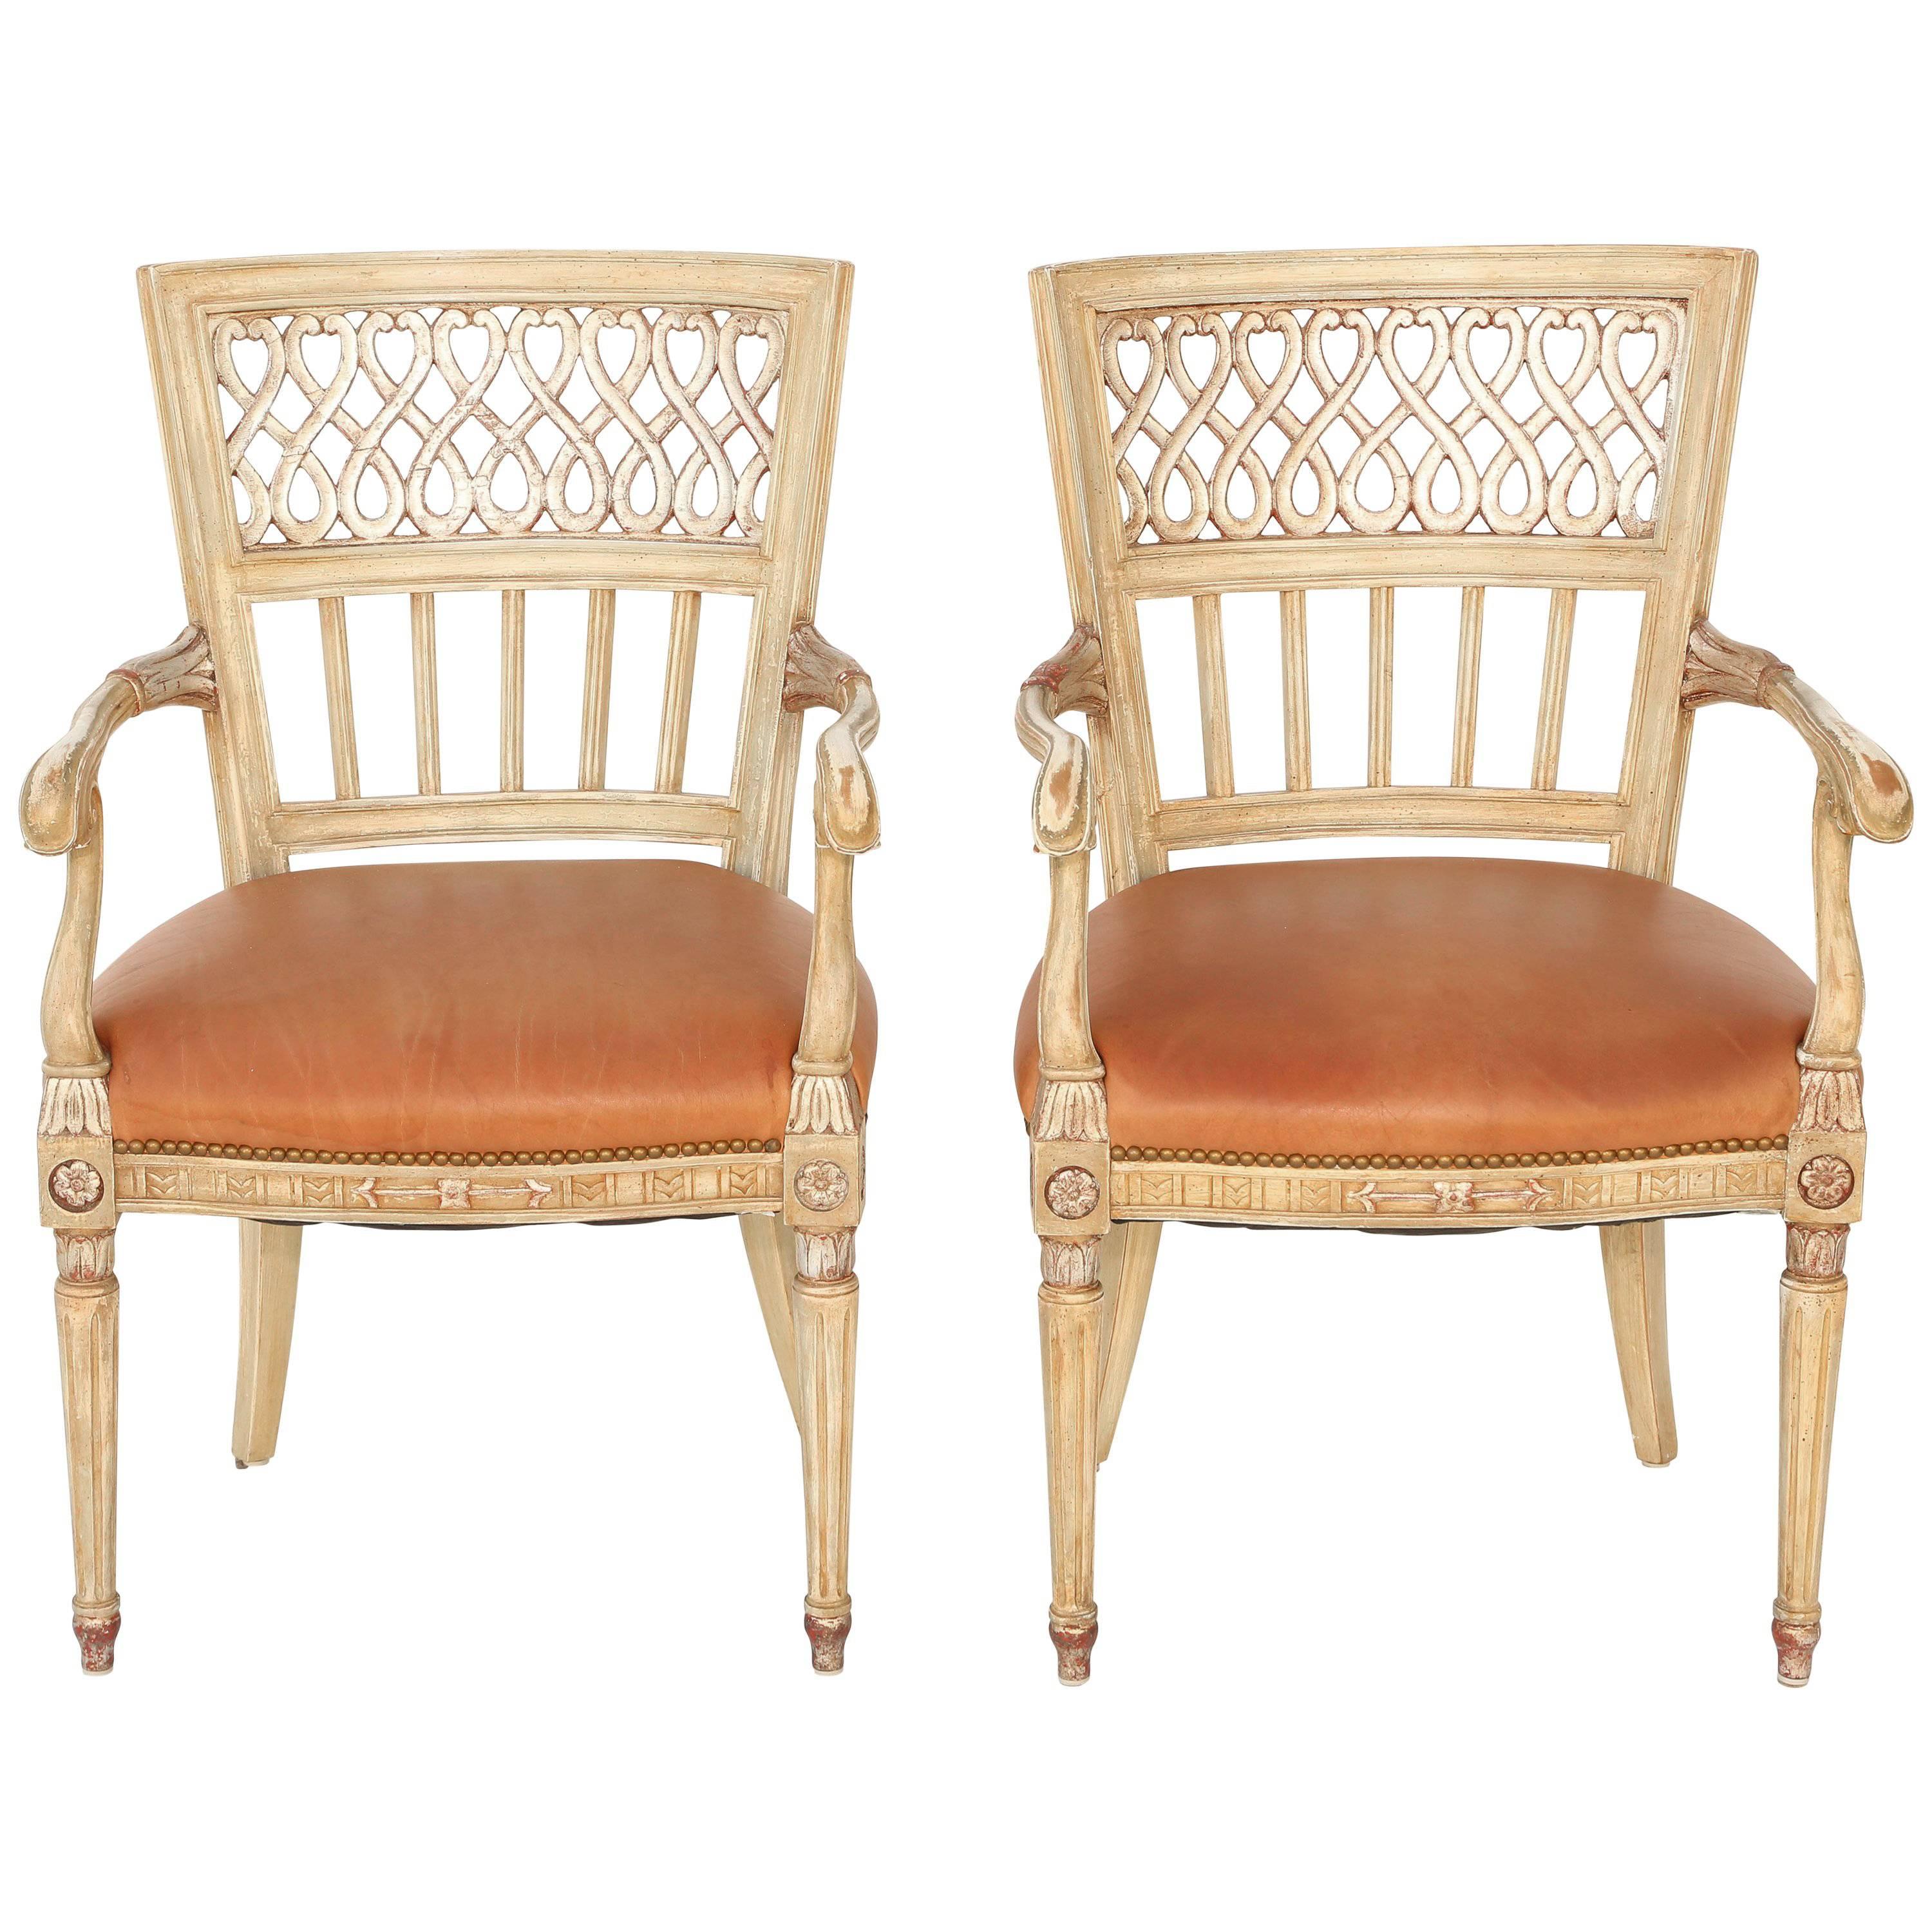 Pair of Painted and Parcel Silvergilt Italian Armchairs, circa 1920s